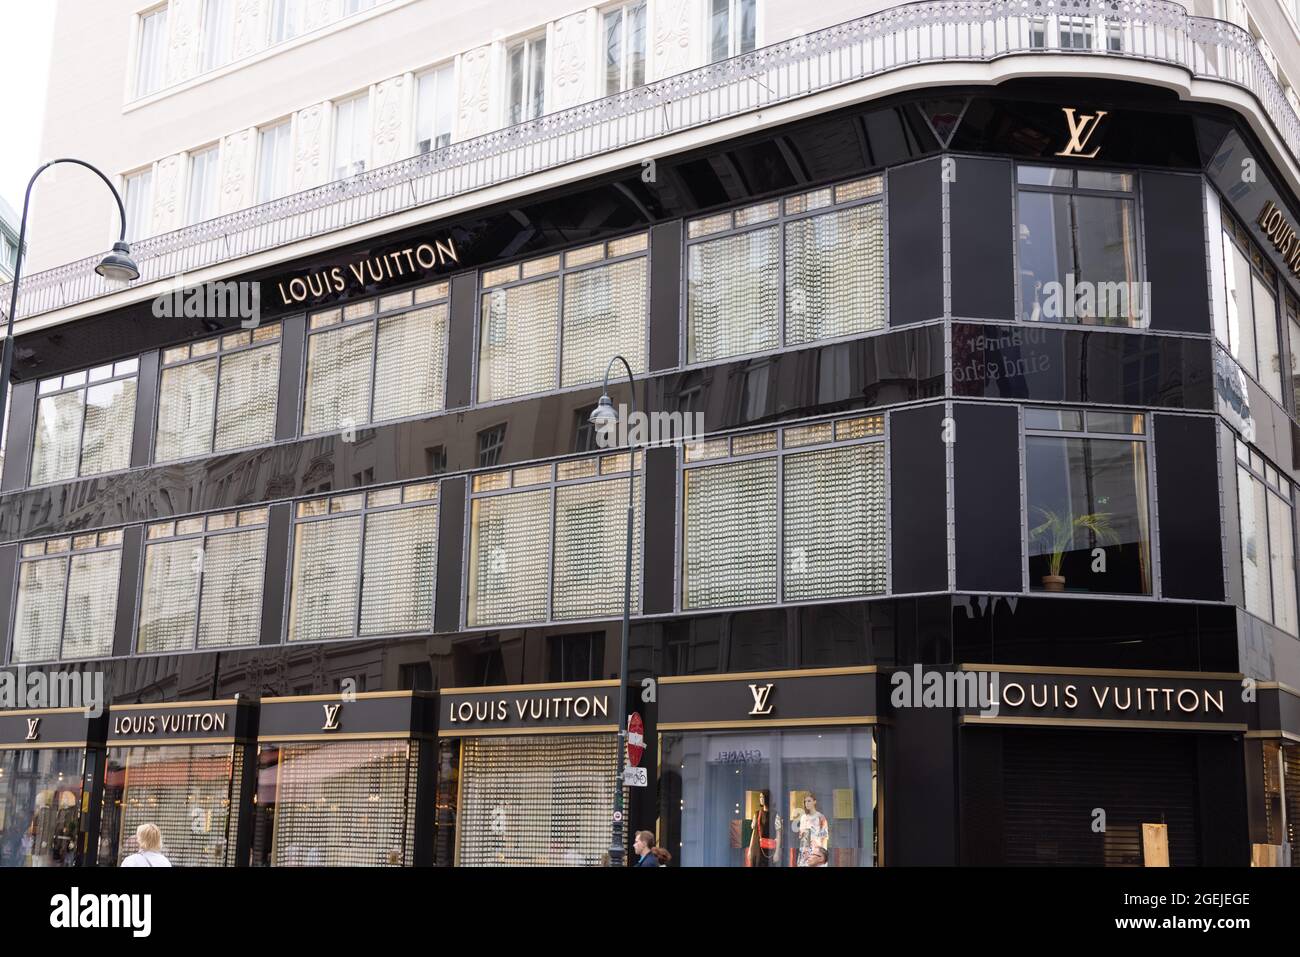 Louis Vuitton opens flagship store in historic location in Graben